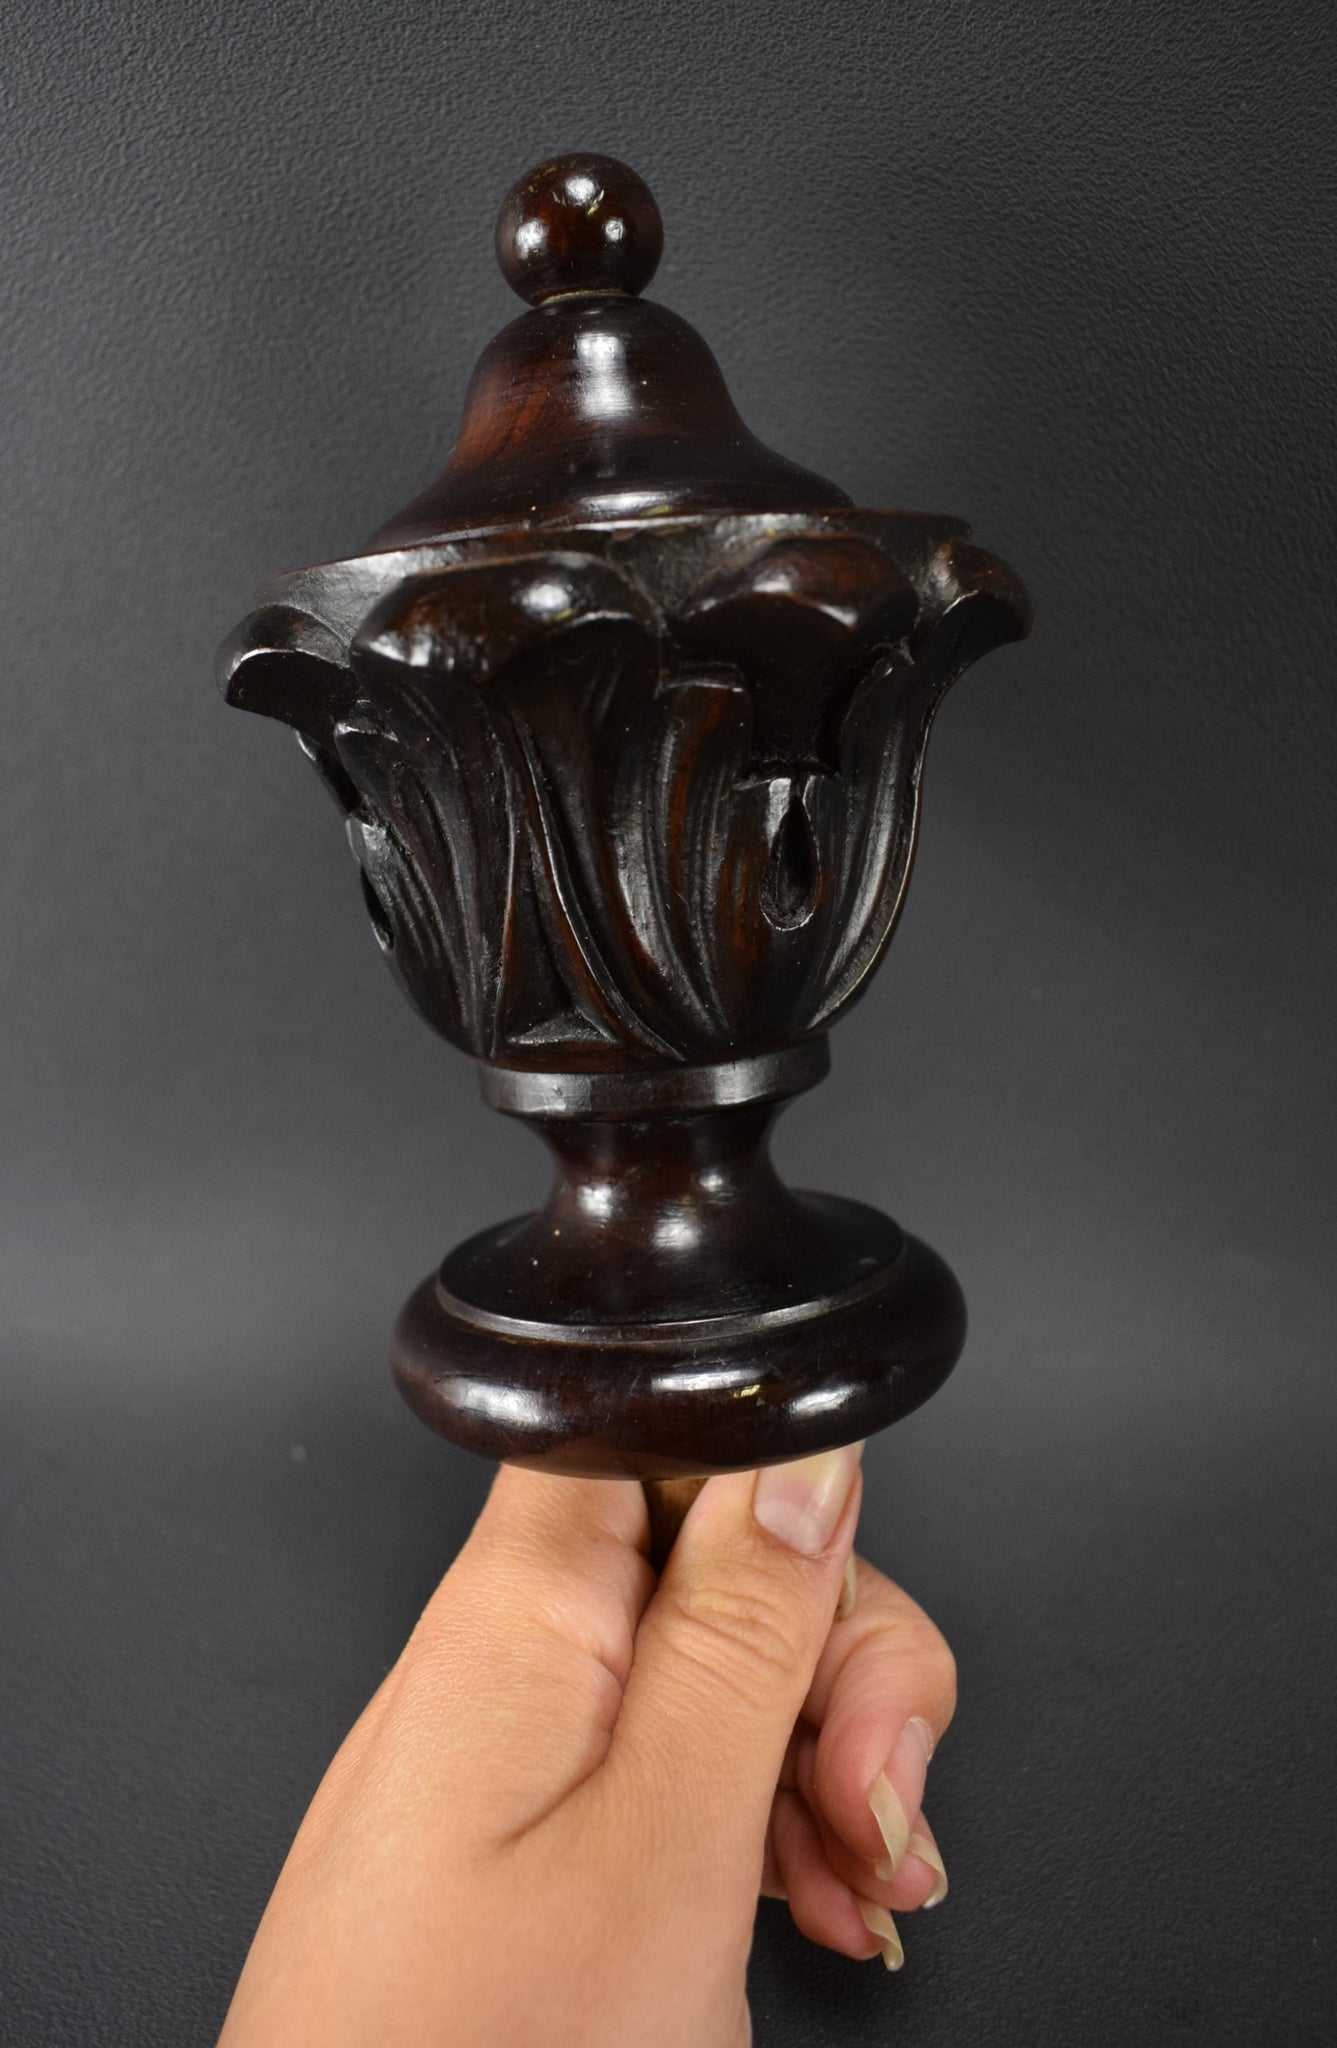 French Antique Architectural Carved Wood Stairwell Staircase Newel Post Cap Finial